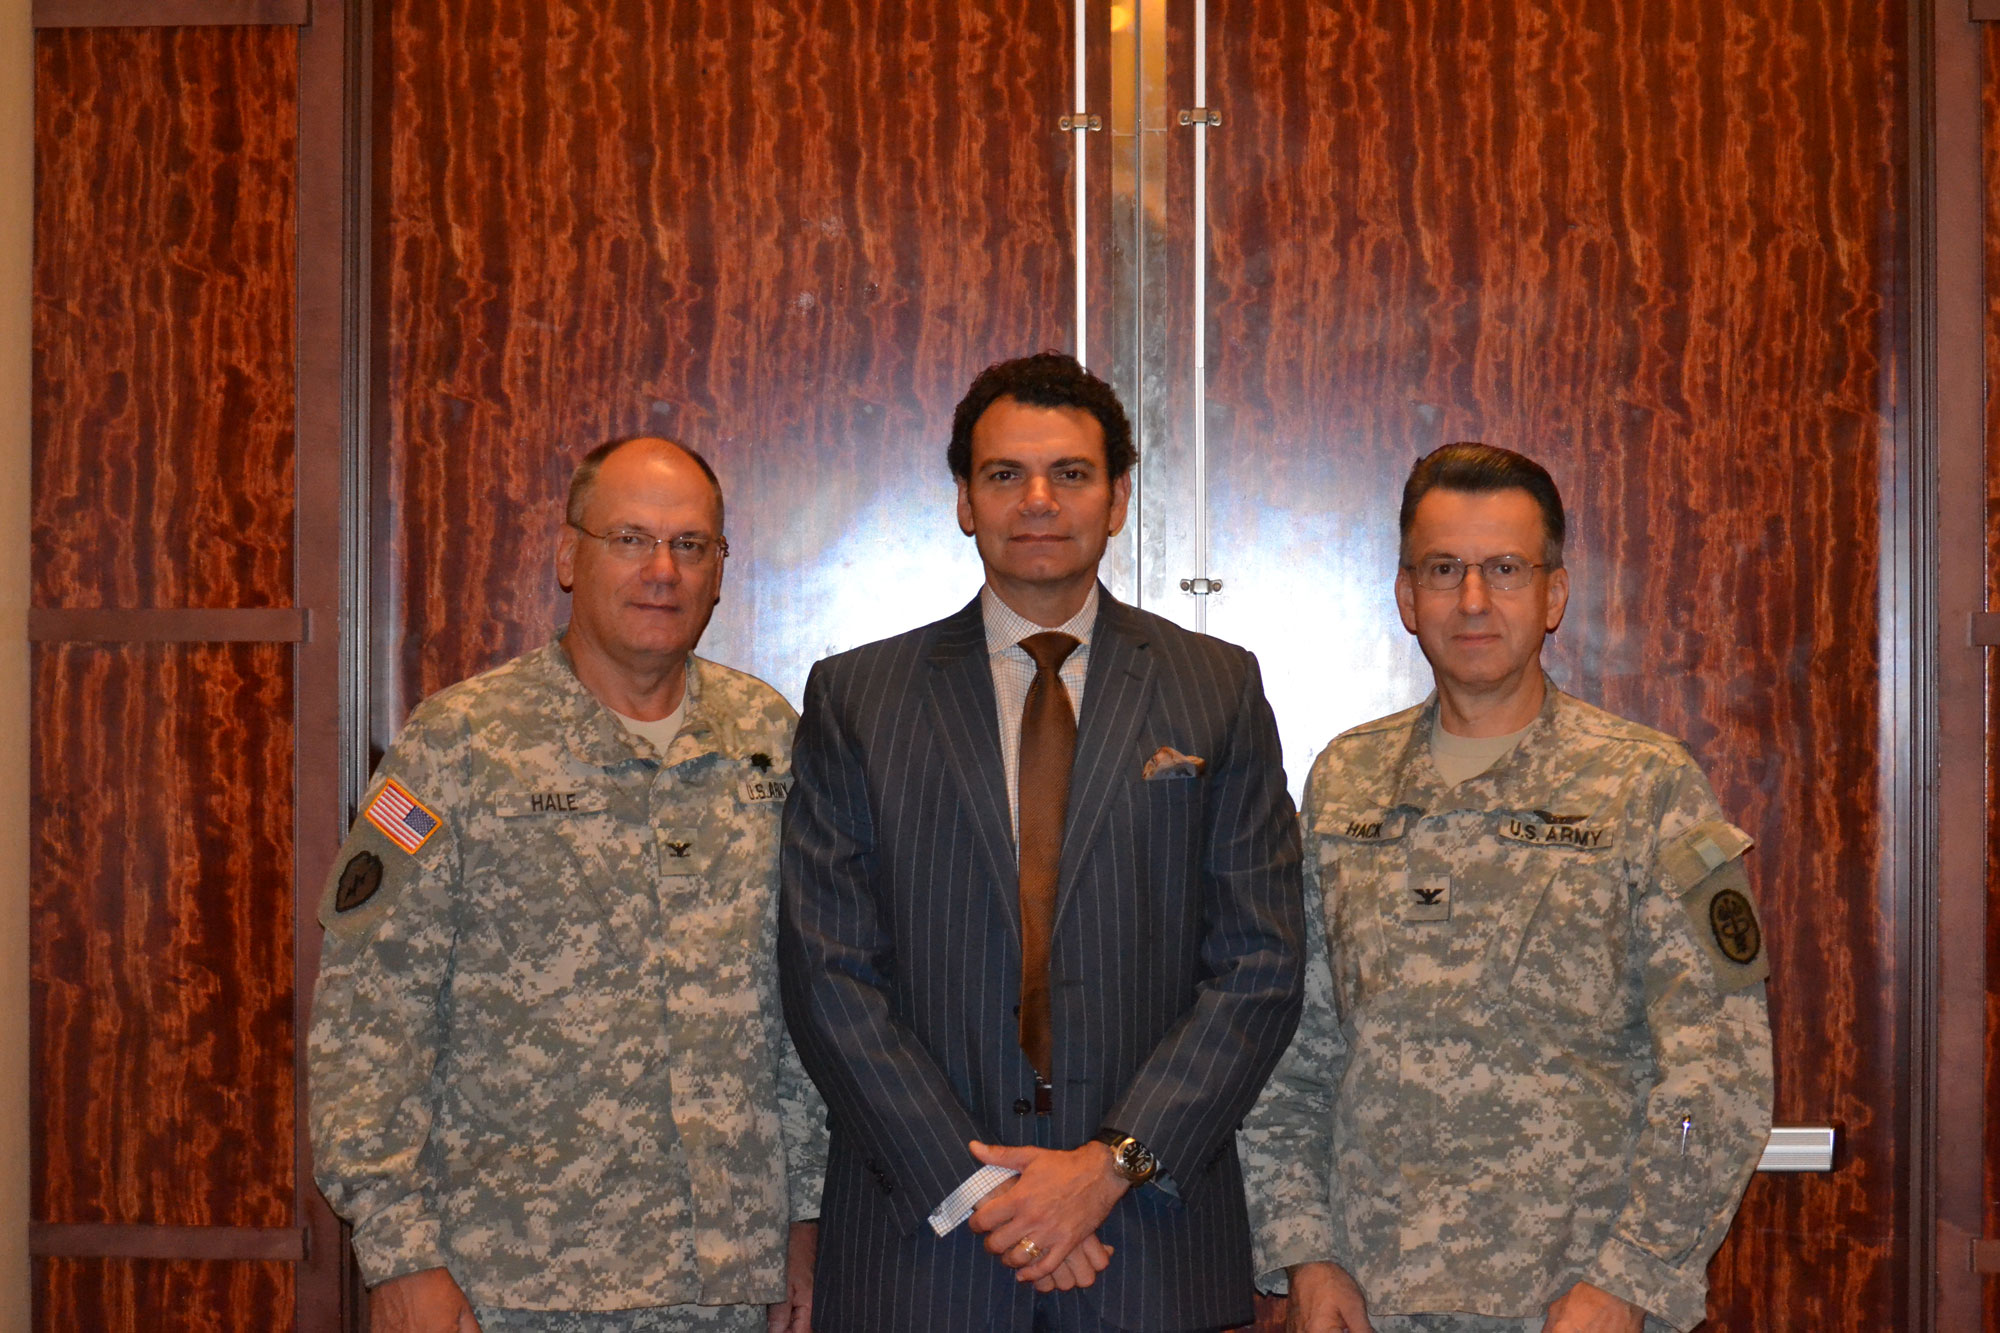 Col. Robert Hale, U.S. Army Institute of Surgical Research; Dr. Eduardo Rodriquez, University of Maryland; and Col. Dallas Hack, director of the USAMRMC Combat Casualty Care Research Program.